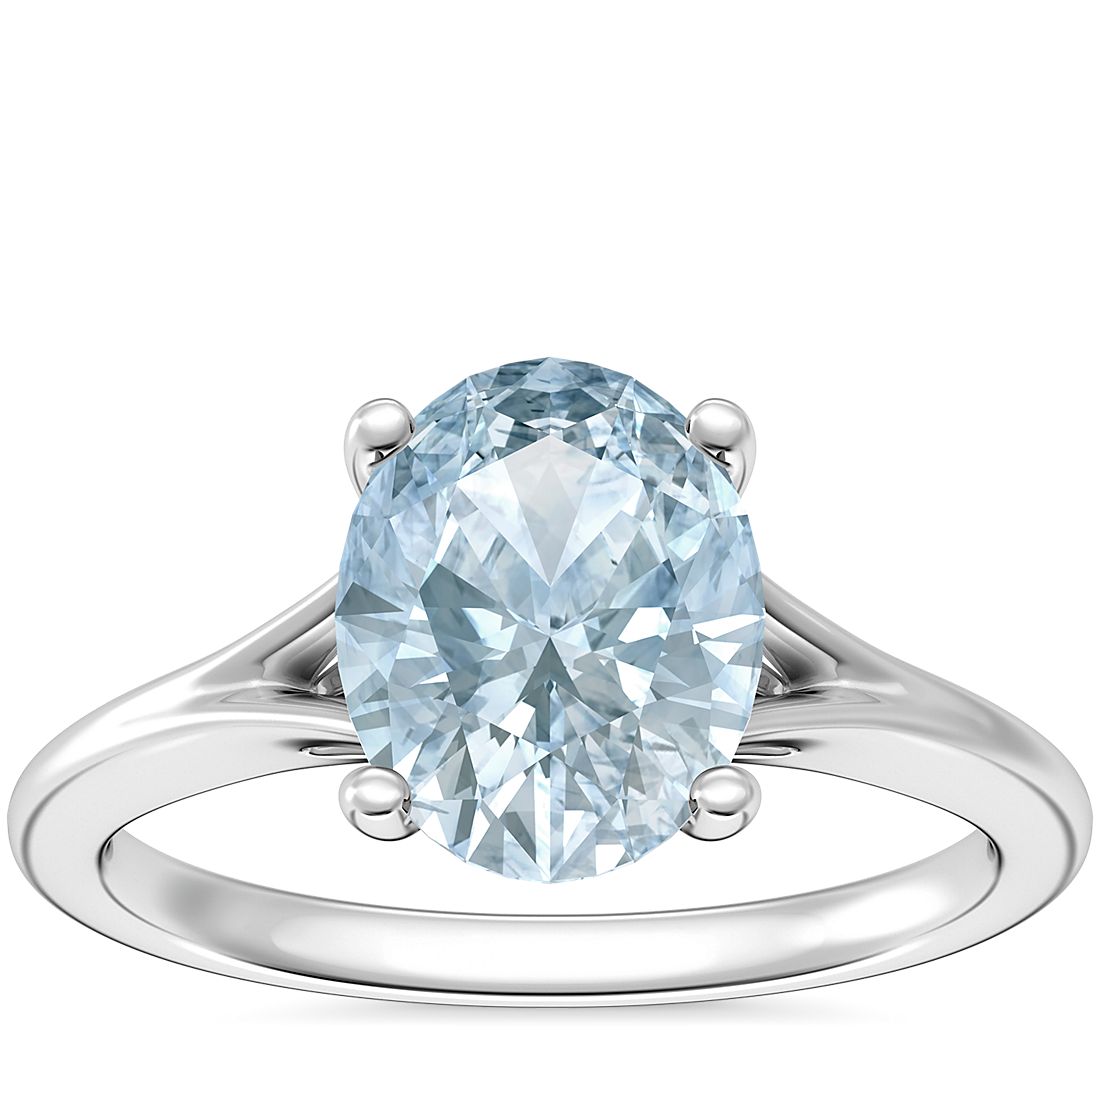 Petite Split Shank Solitaire Engagement Ring with Oval Aquamarine in Platinum (9x7mm)